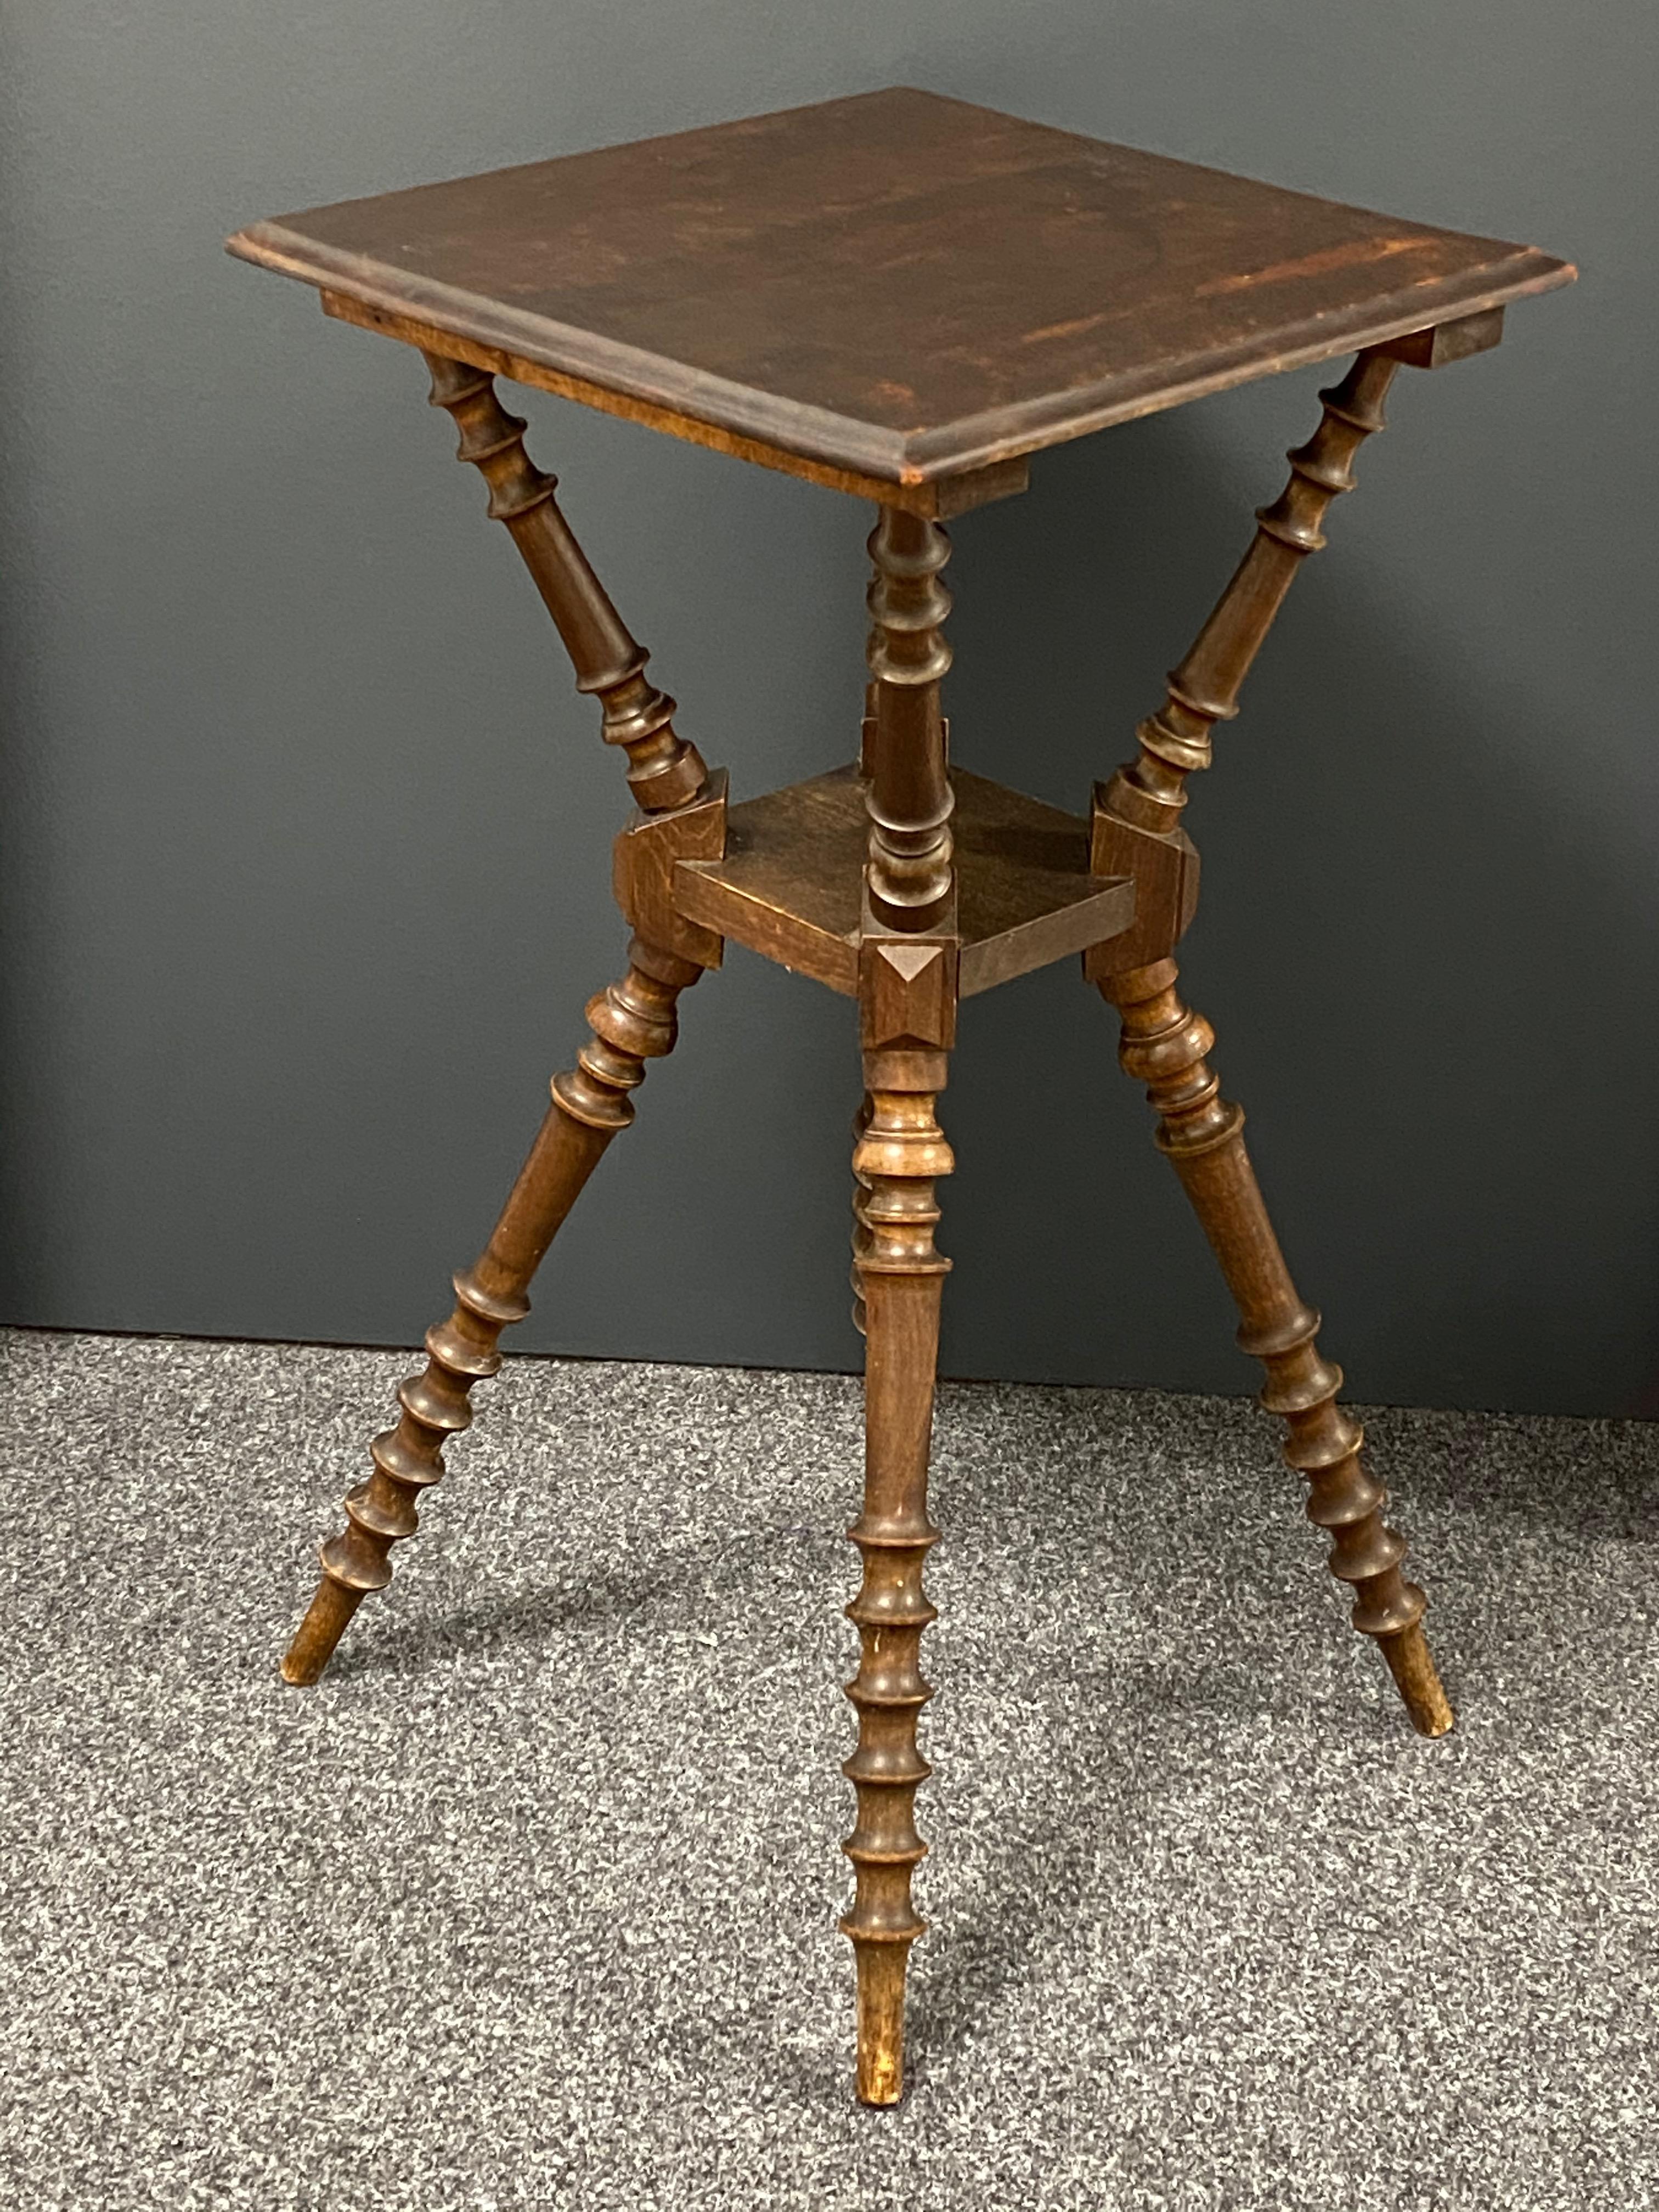 Hand-Crafted Gypsy Style Wine or Side Table, Antique German, 1910s